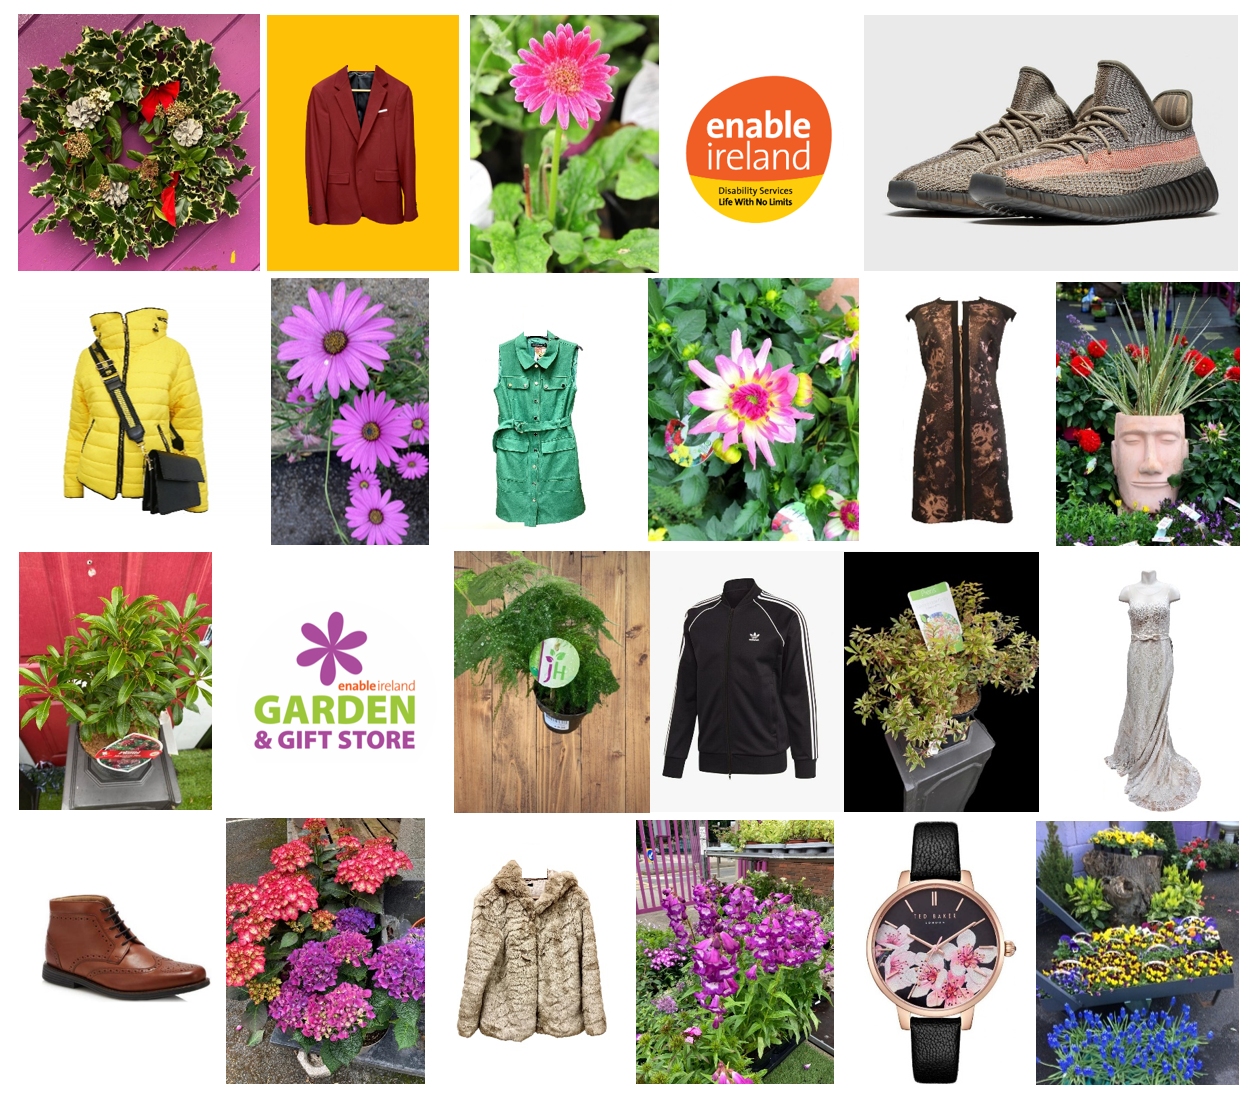 The image is a collage of various sustainable gifts available at Enable Ireland garden centre, ebay store and charity shops.